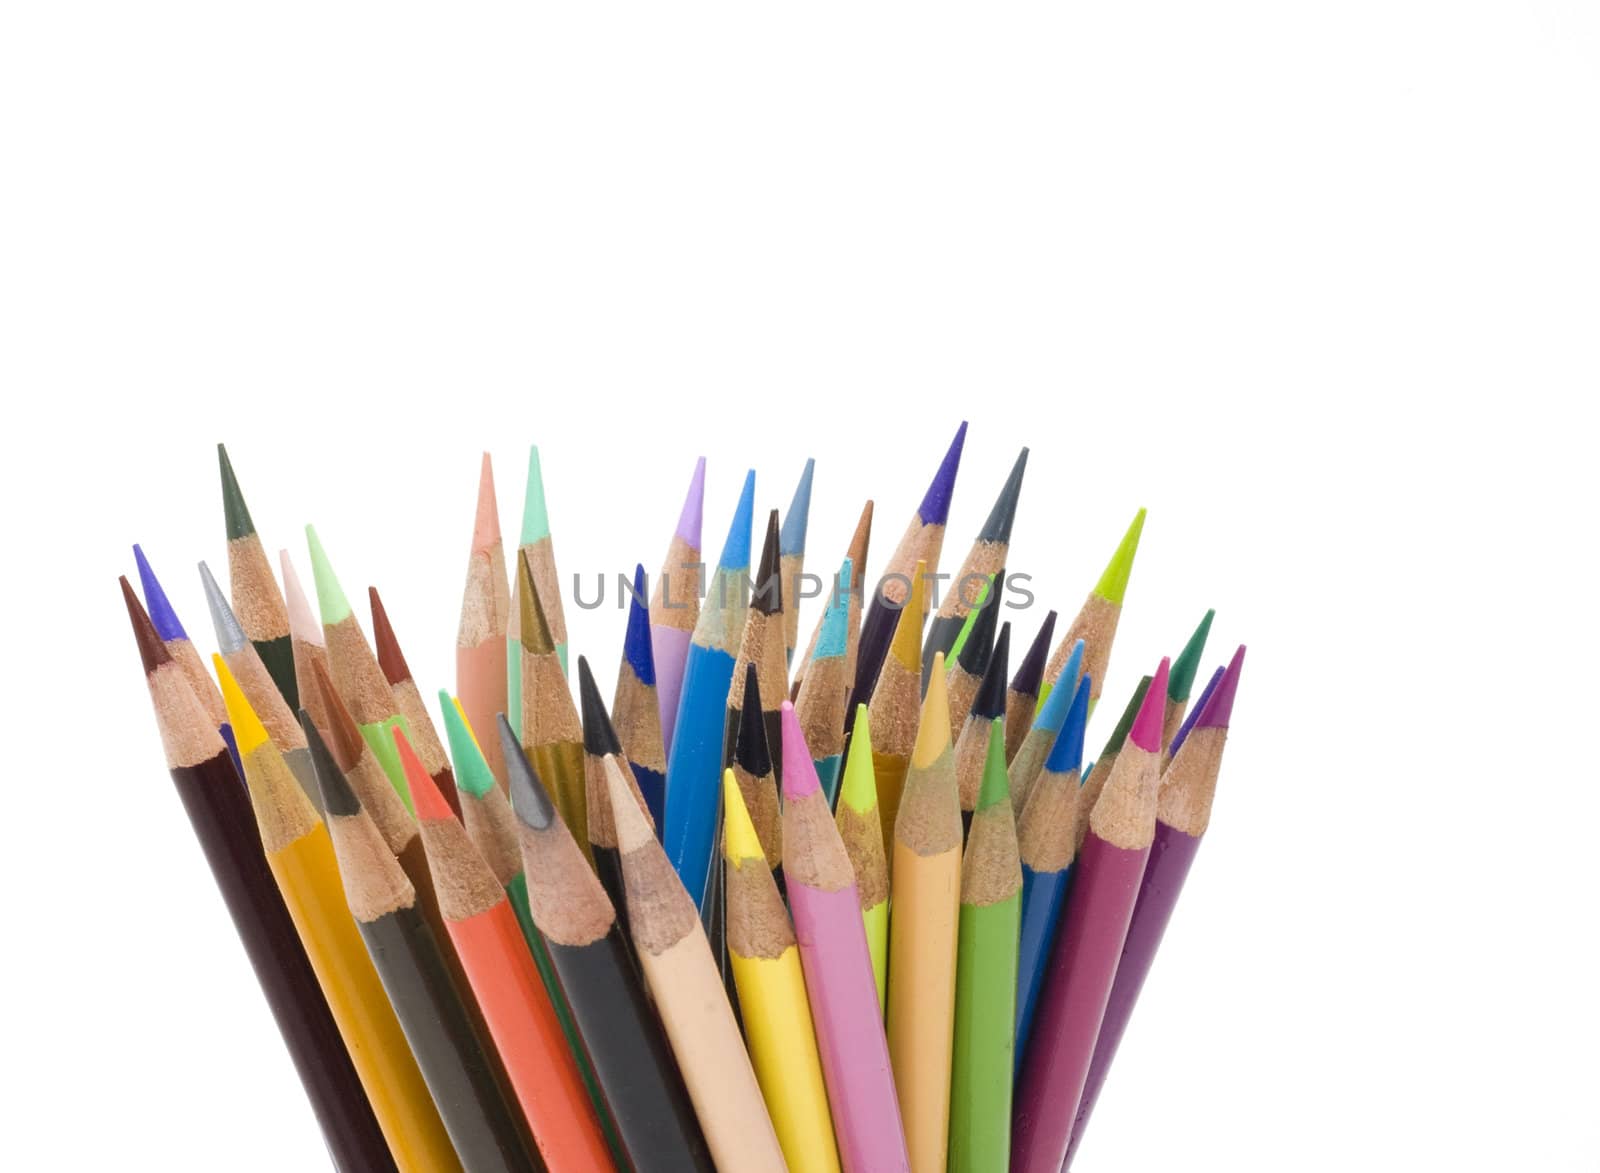 Many colored pencils with white background.